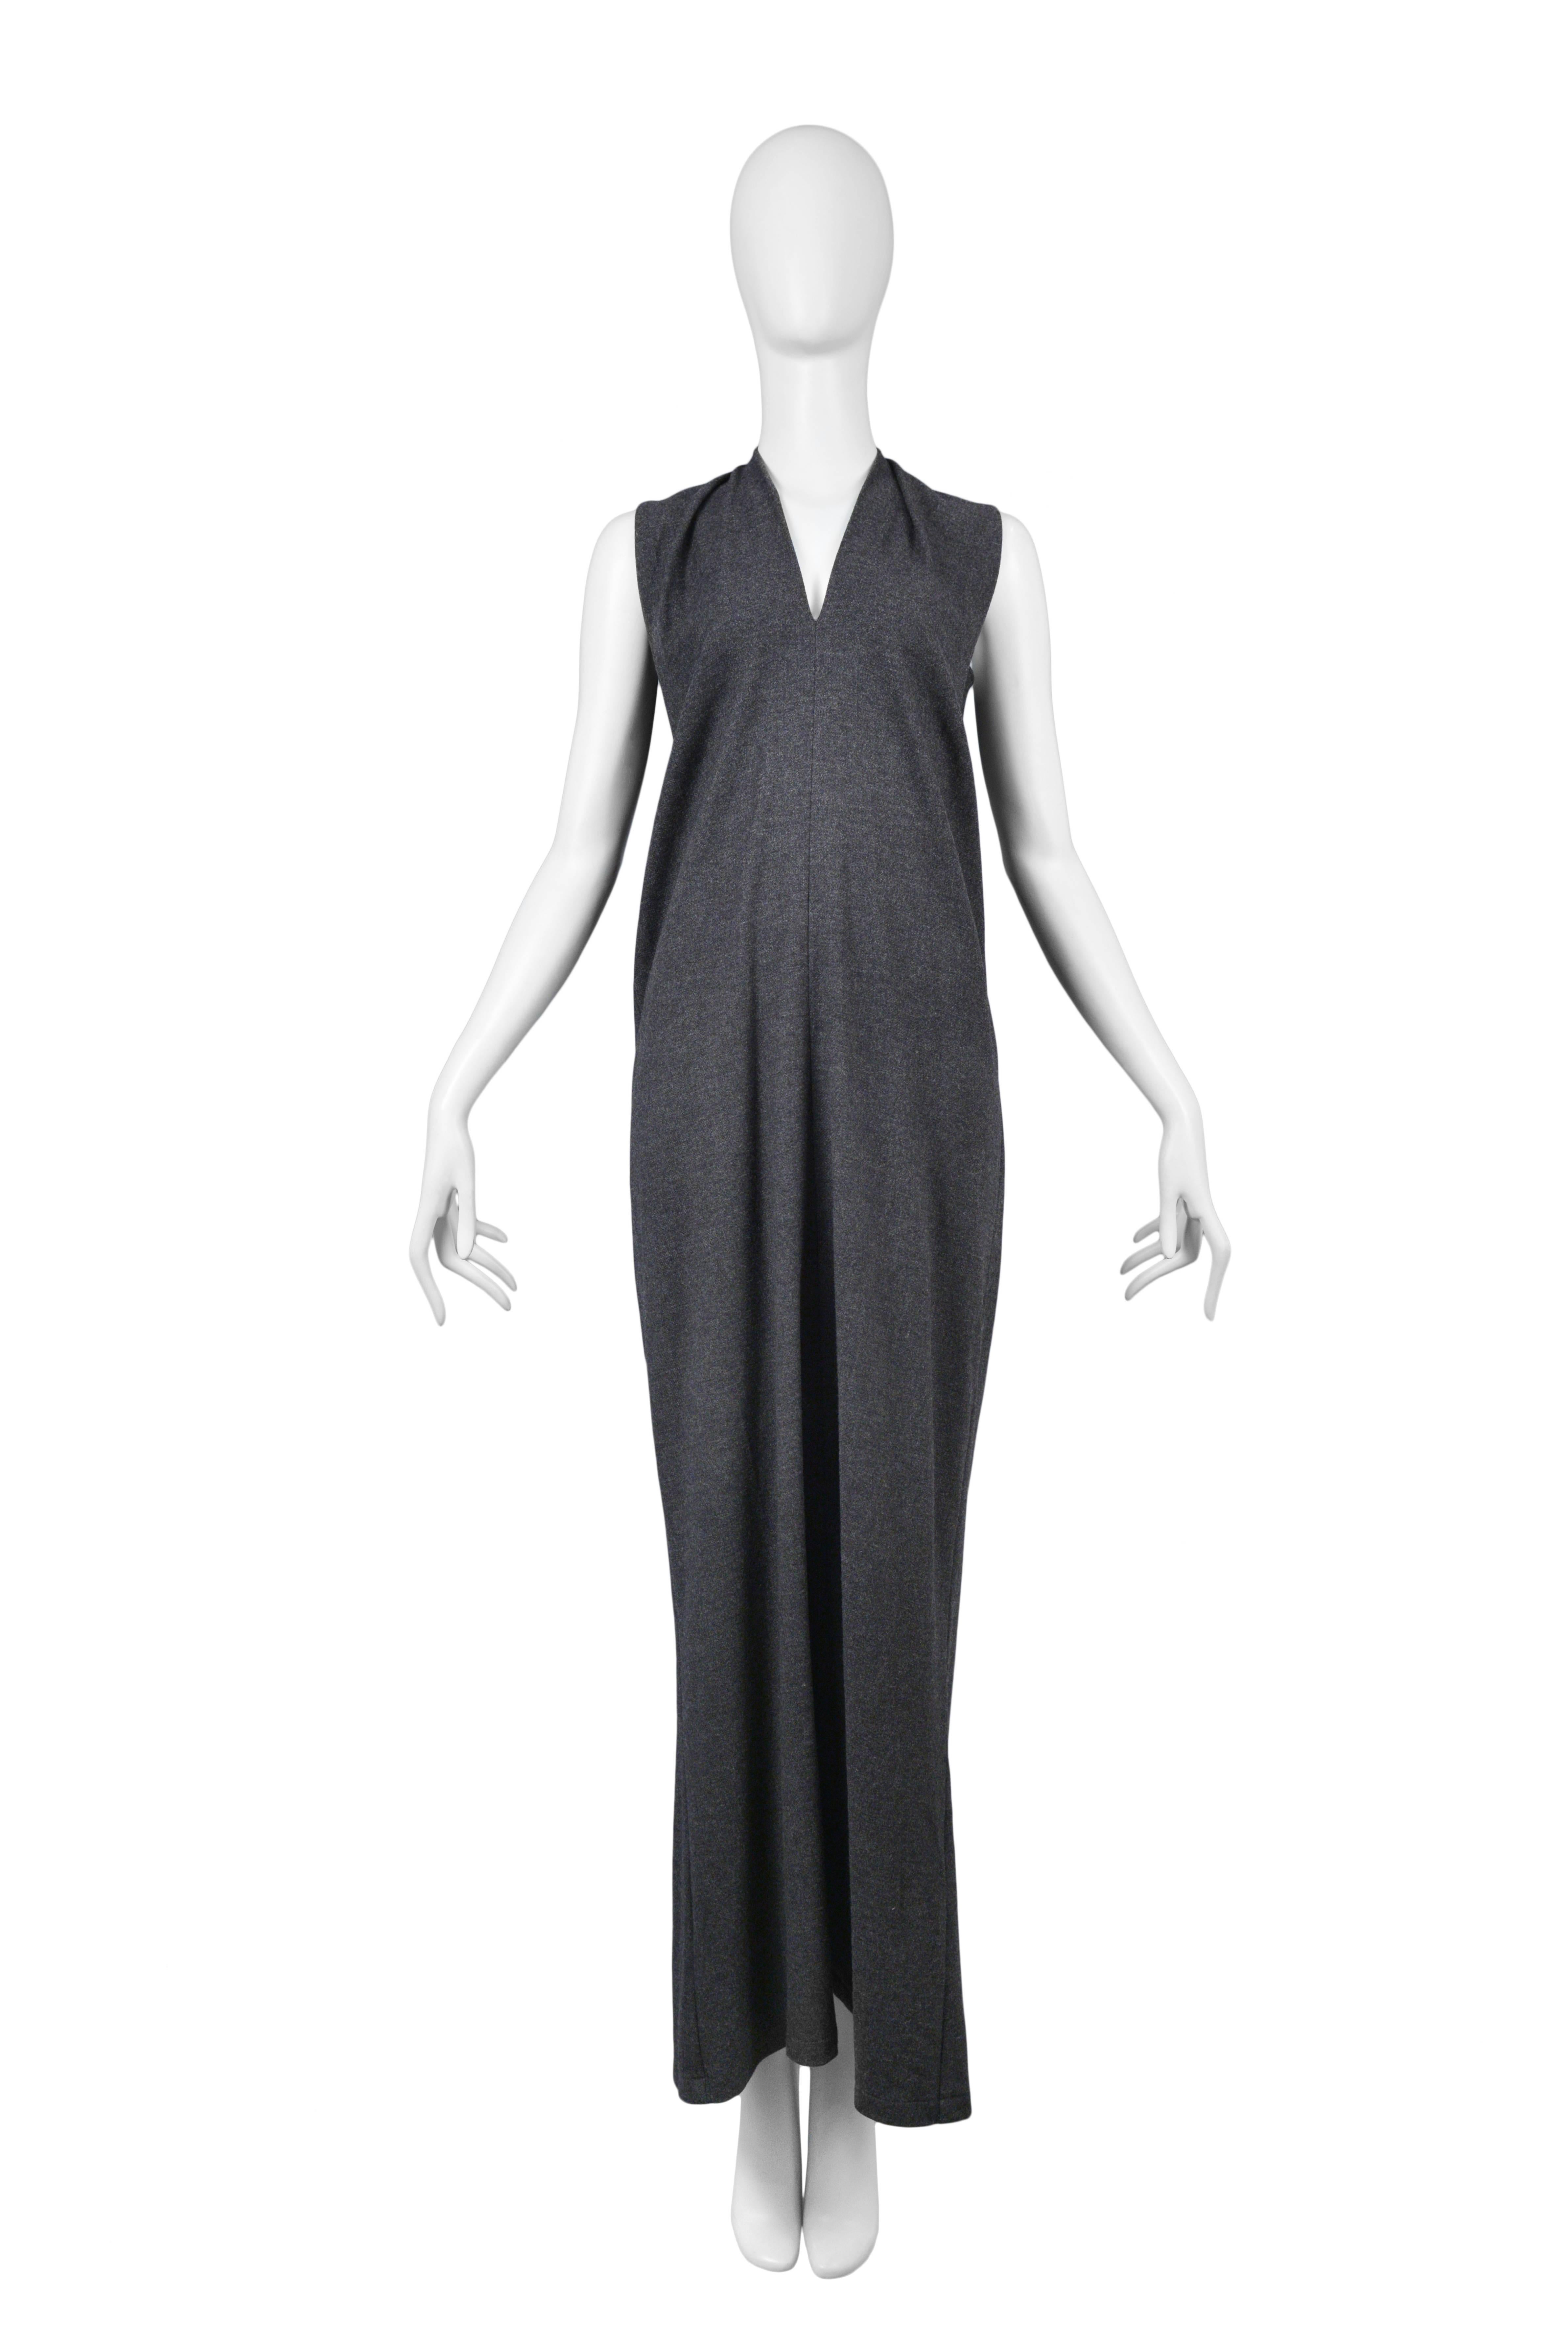 Resurrection Vintage is excited to offer a vintage Maison Martin Margiela flat collection grey wool sleeveless maxi dress featuring a v-neckline. Circa 1998.

Maison Martin Margiela
Size: 40
Measurements: Bust 38